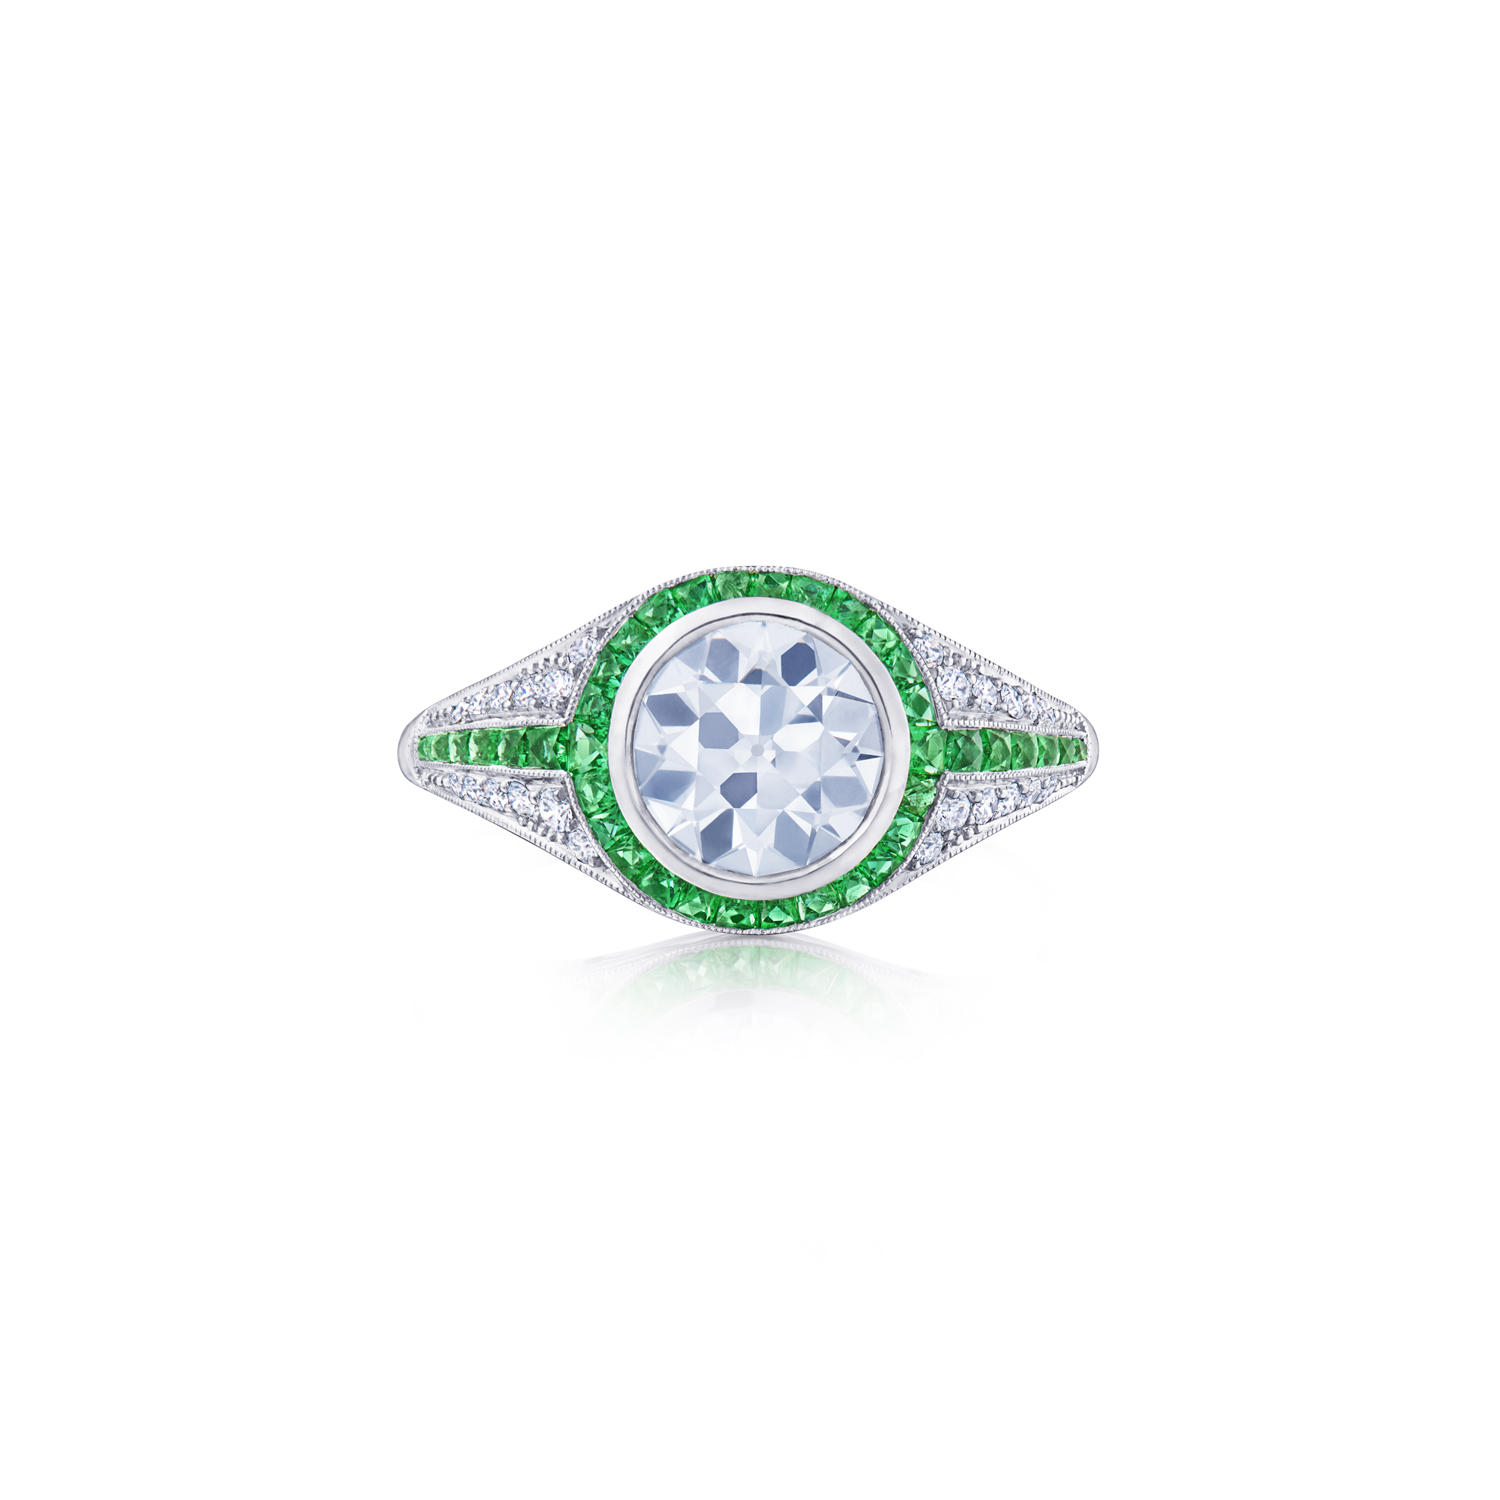 Engagement Ring with a Fred Leighton Round Diamond, Pavé and Emeralds in Platinum, Style F-1068FLOE-0-DIAEME-PLAT